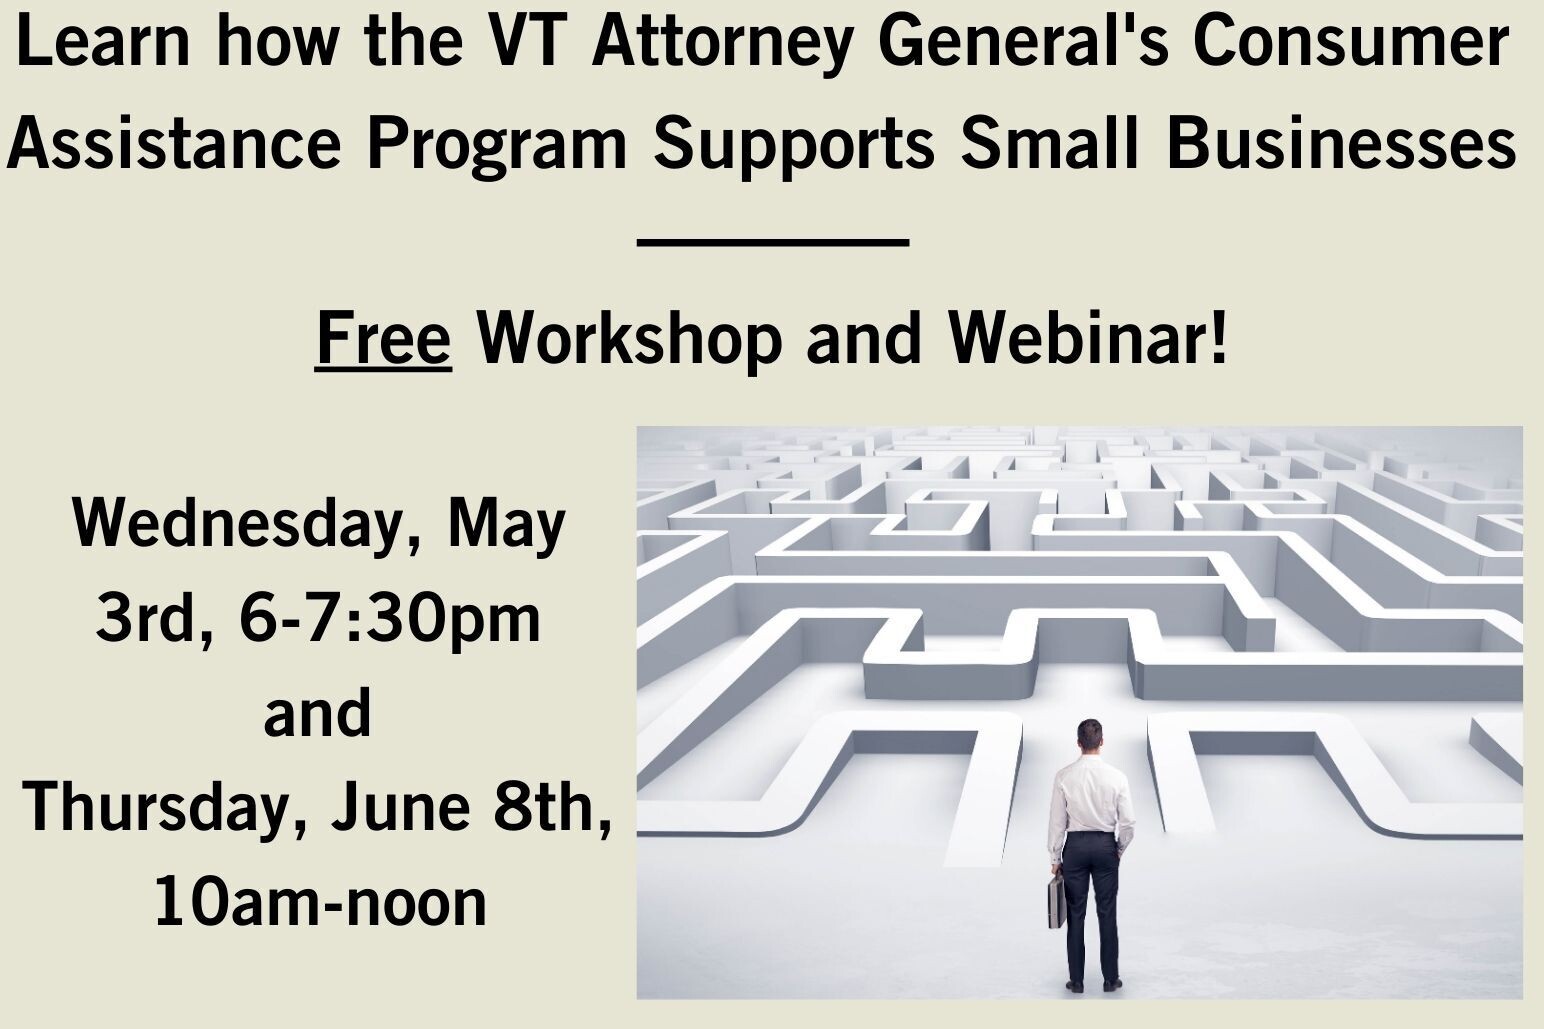 Learn how the VT Attorney General's Consumer Assistance Program Supports Small Businesses